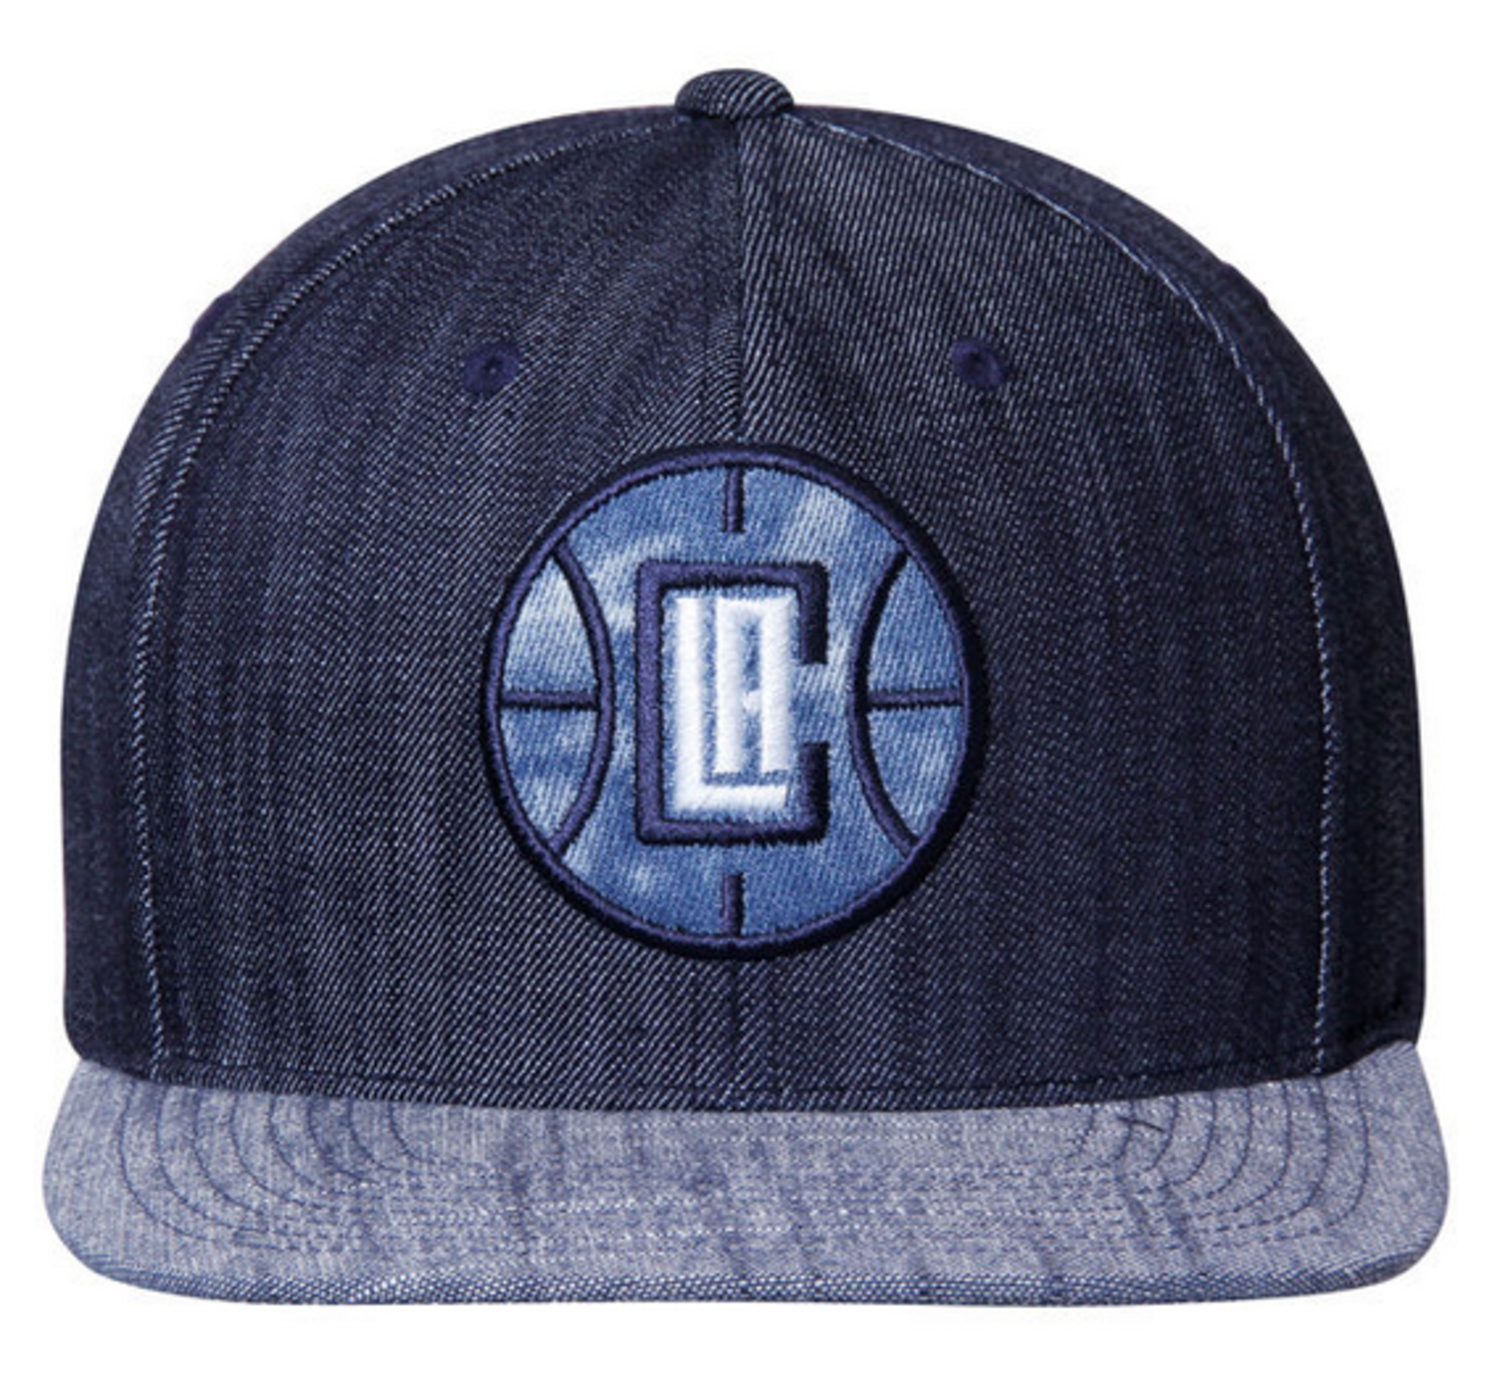 LA Kings Mitchell and Ness Blue Linen Snapback - The Locker Room of Downey